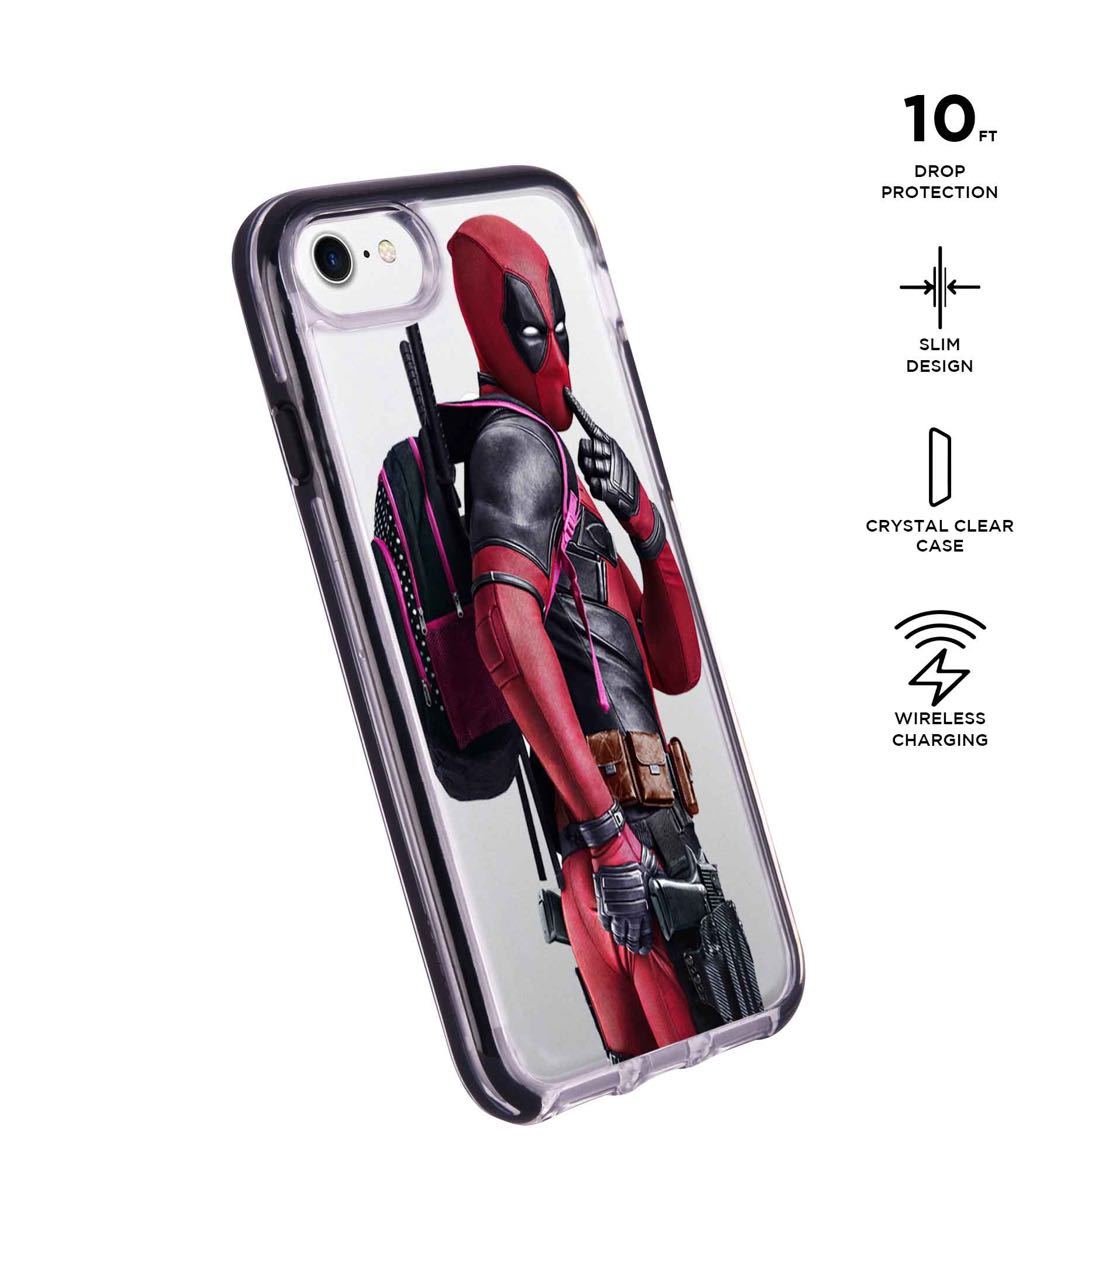 Smart Ass Deadpool - Extreme Phone Case for iPhone 7